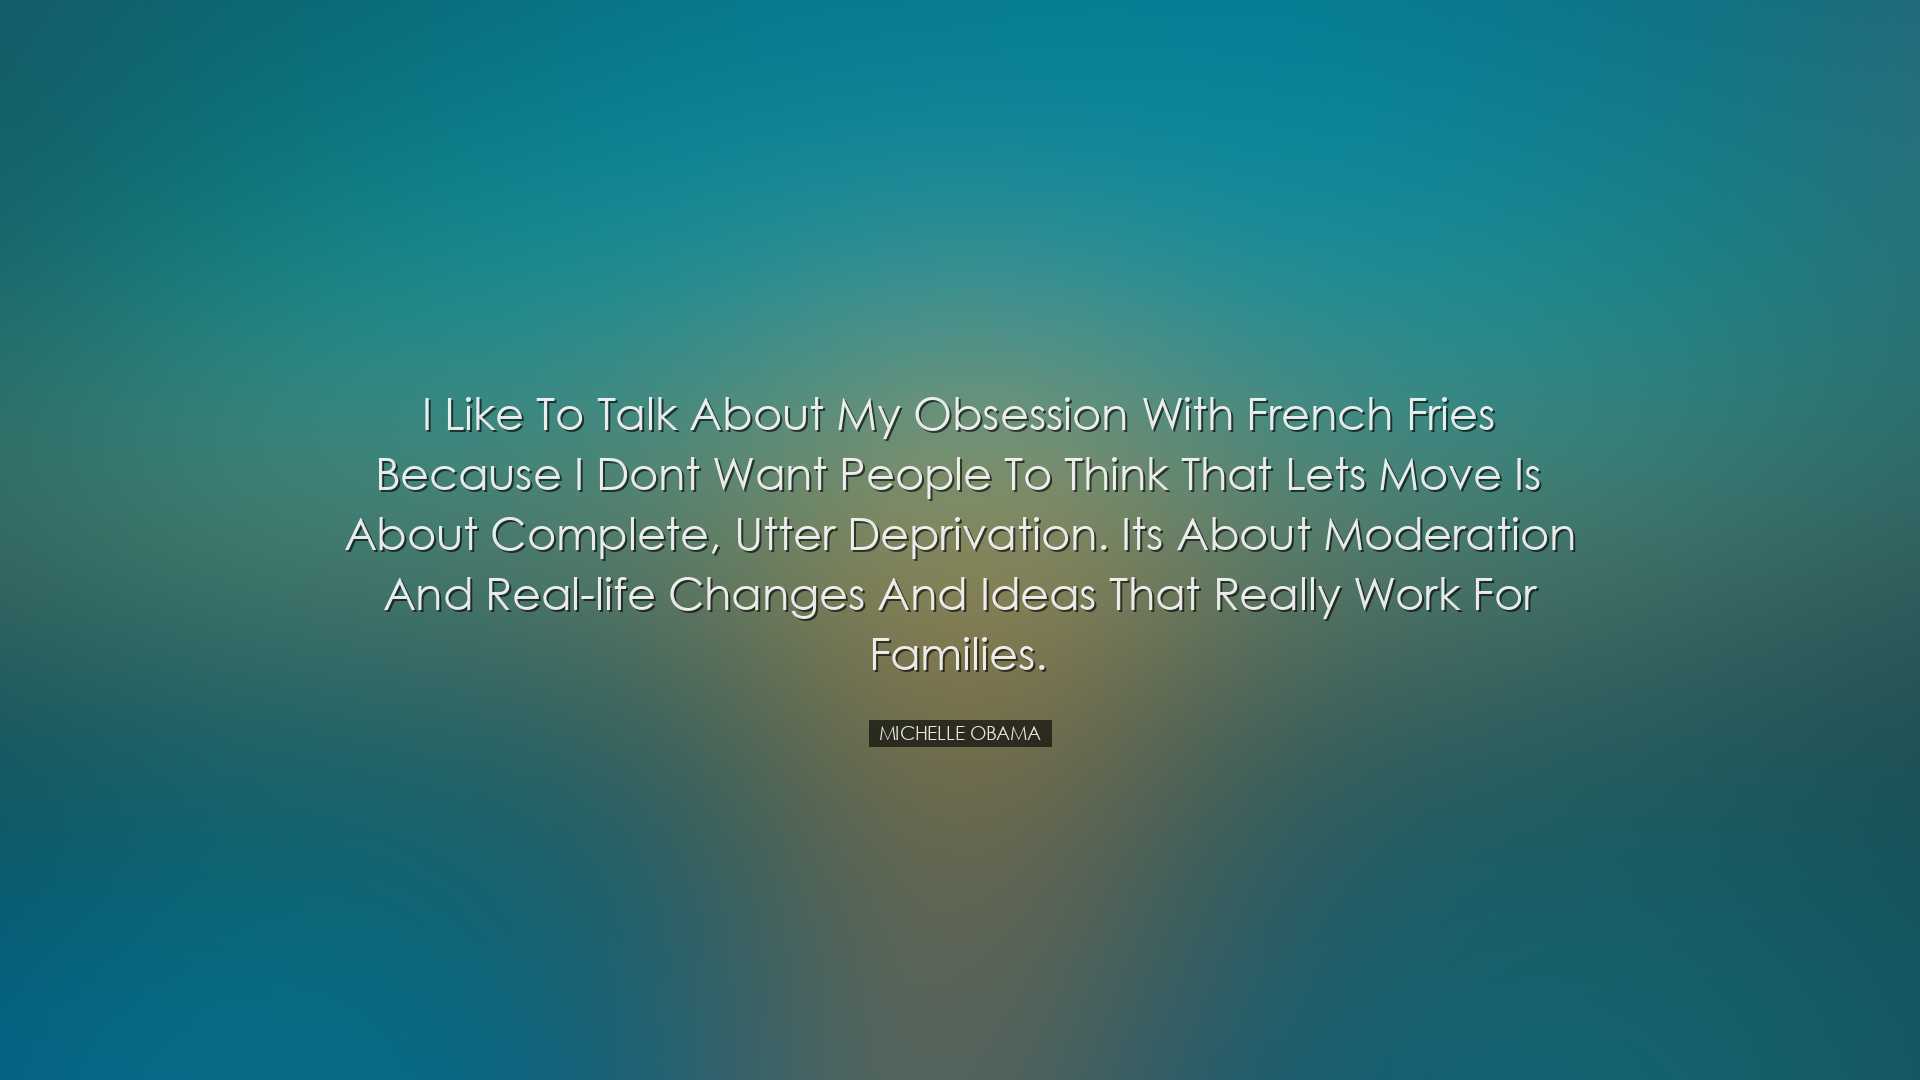 I like to talk about my obsession with french fries because I dont